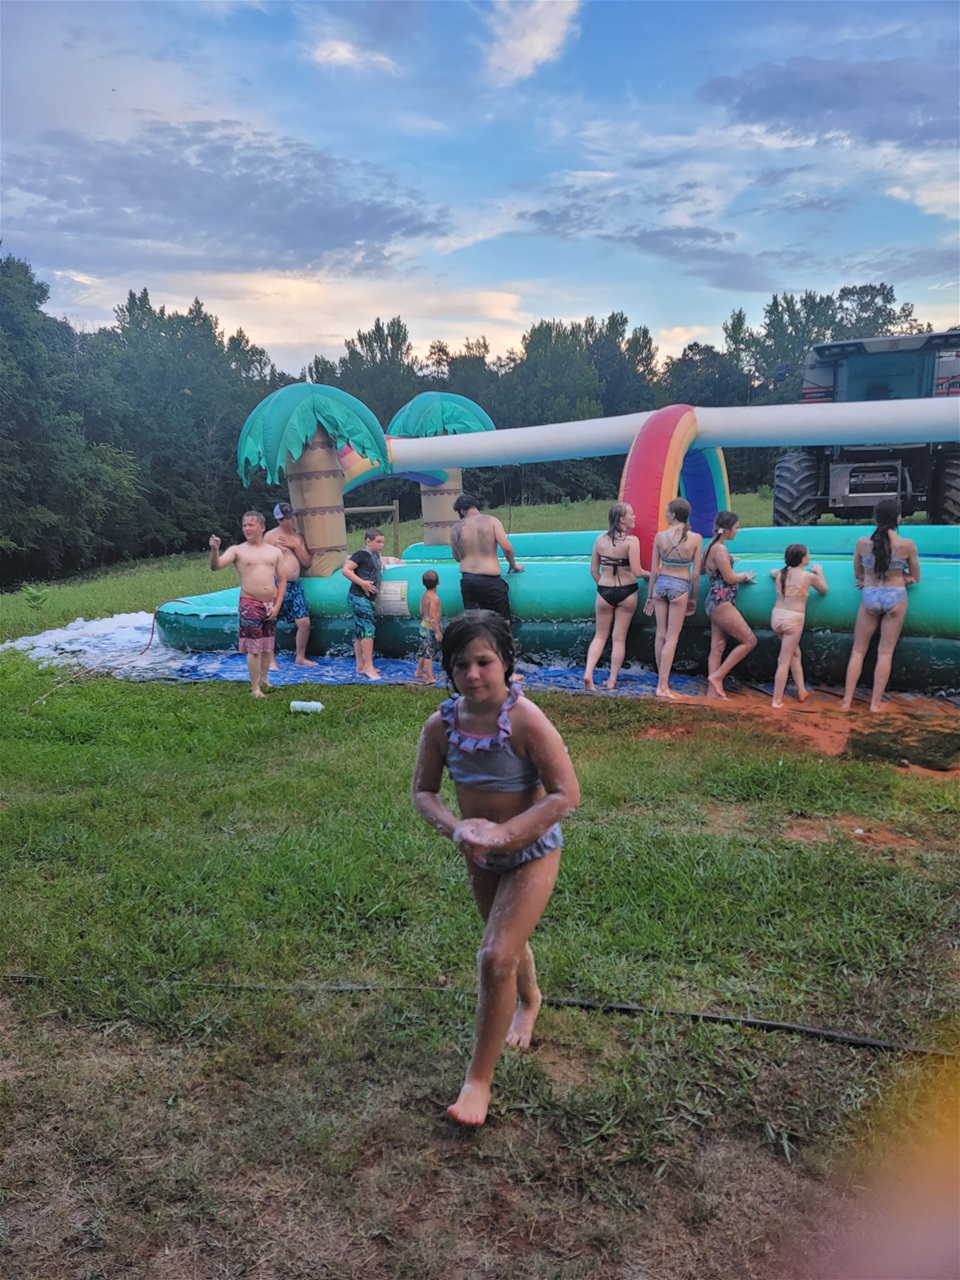 Birthday party with our 25 foot water slide!